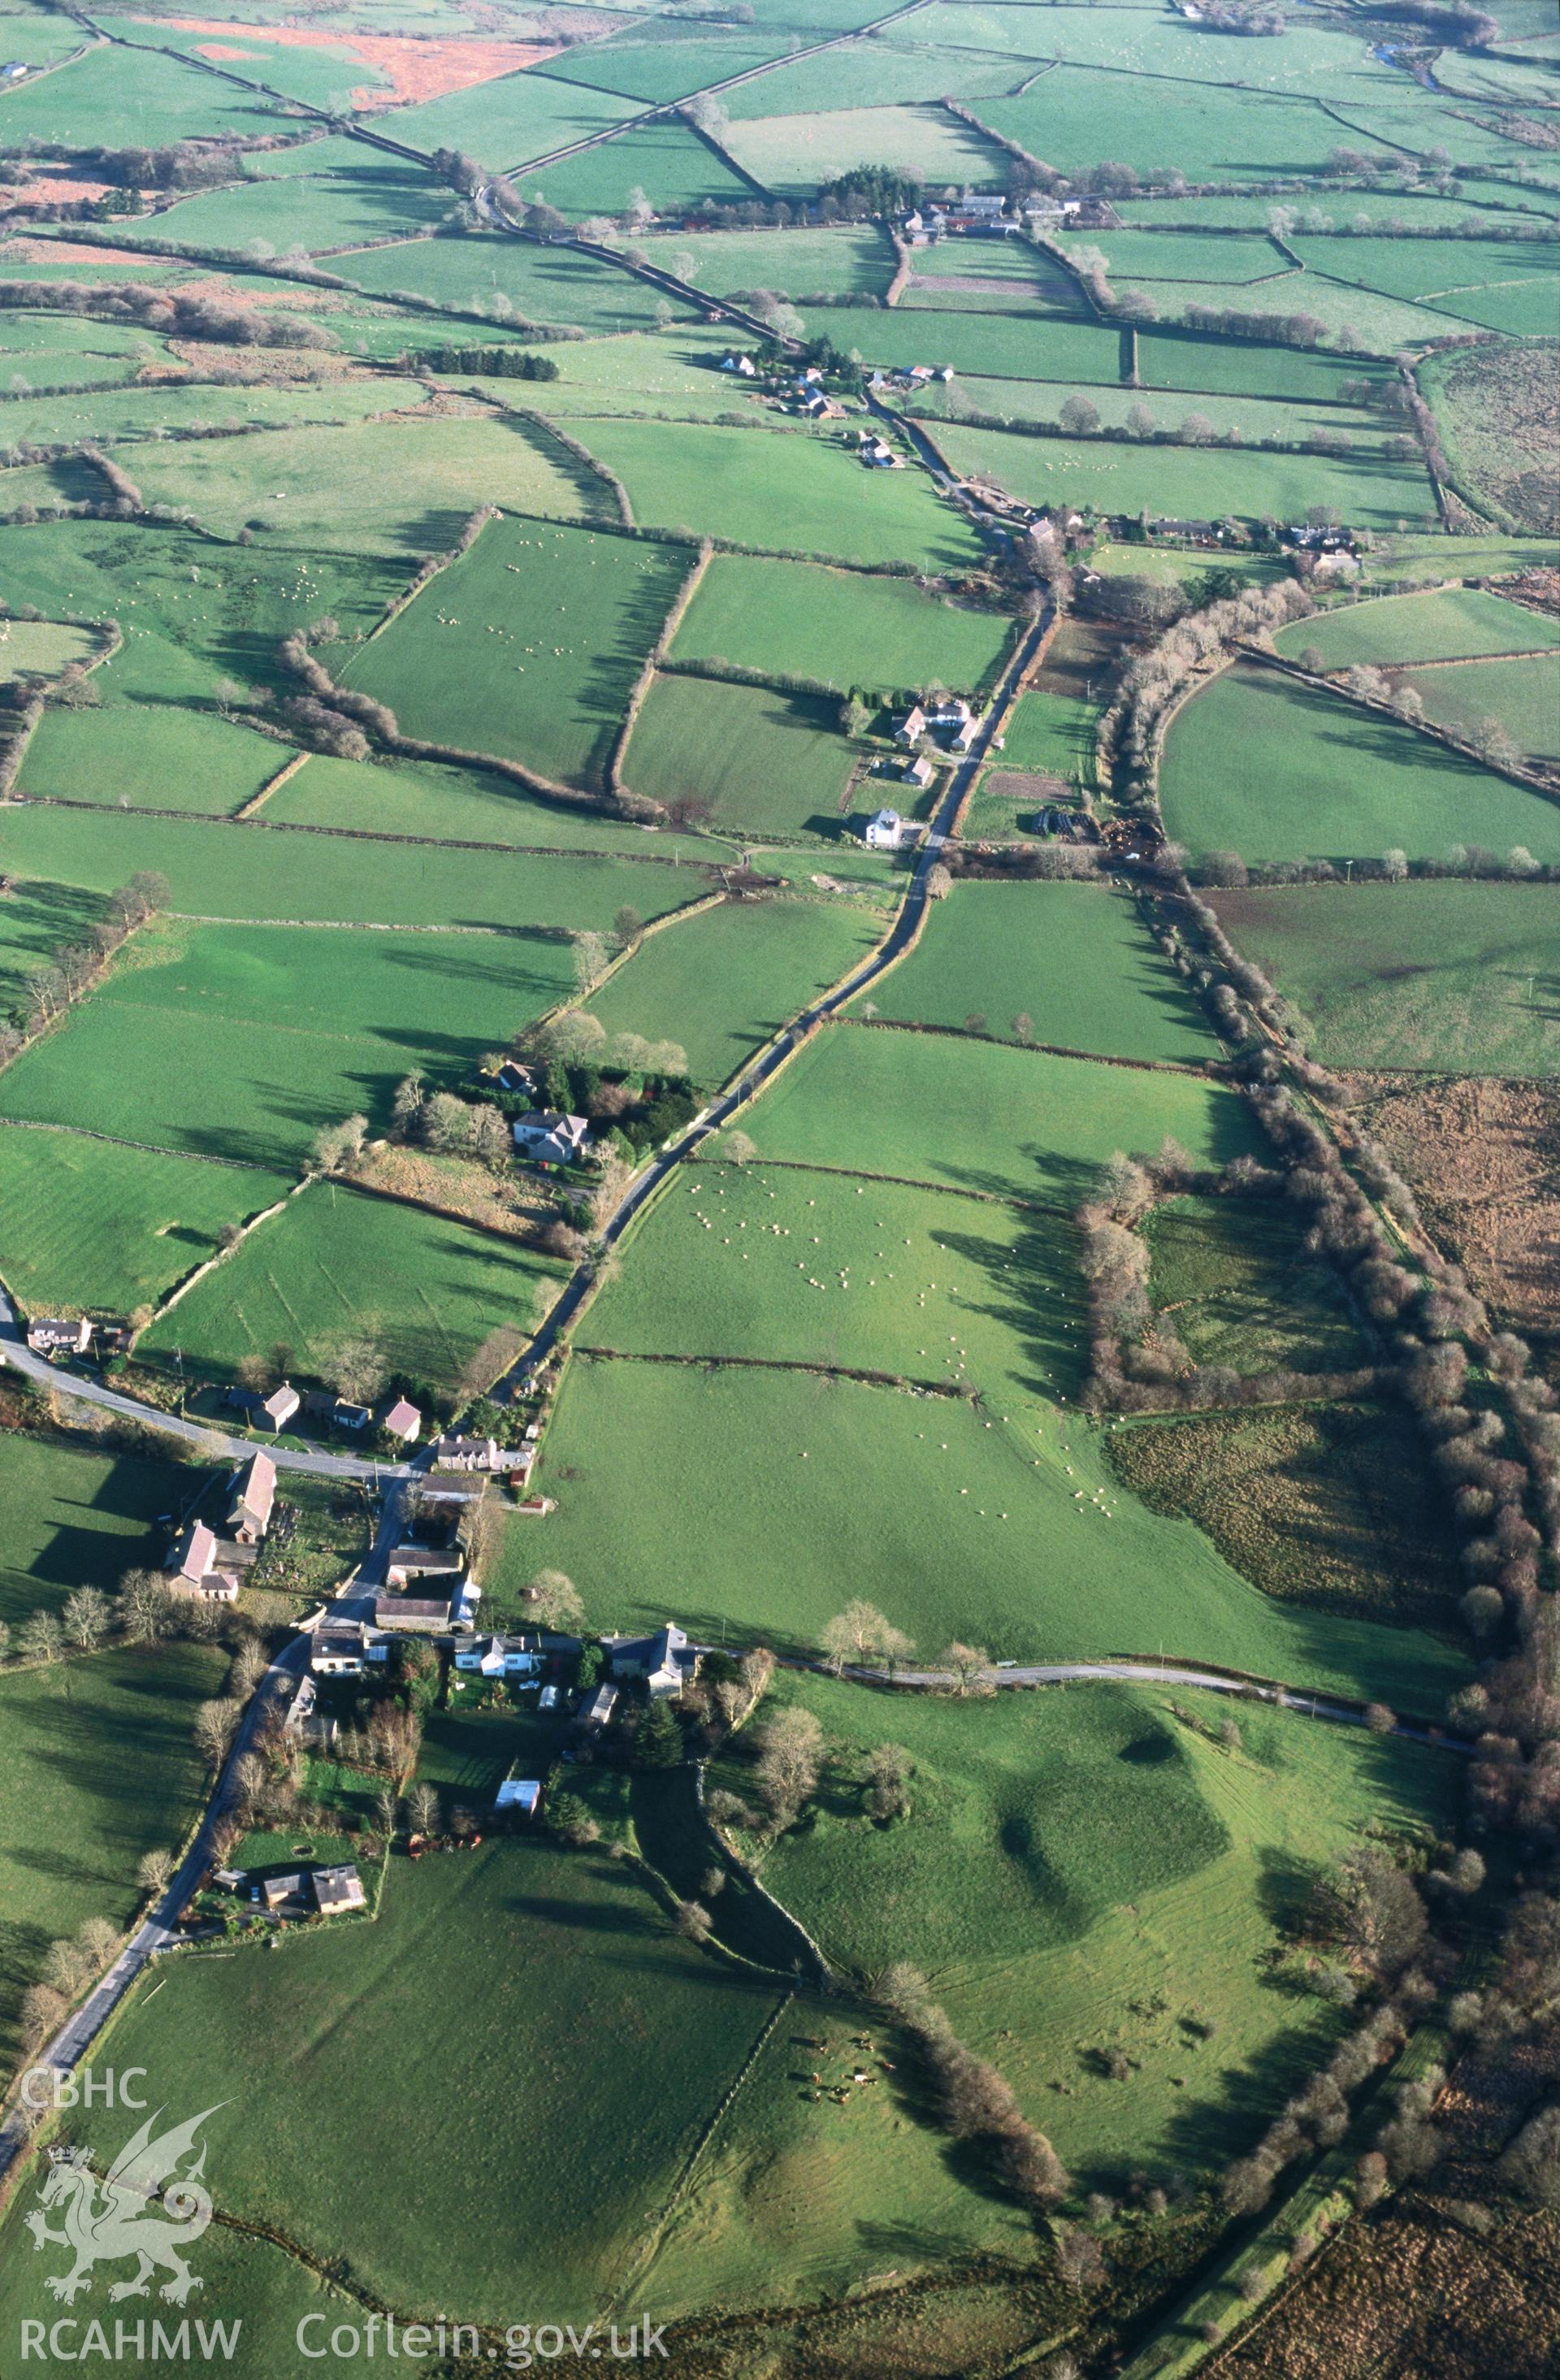 Slide of RCAHMW colour oblique aerial photograph of Ystradmeurig, taken by T.G. Driver, 10/12/2001.